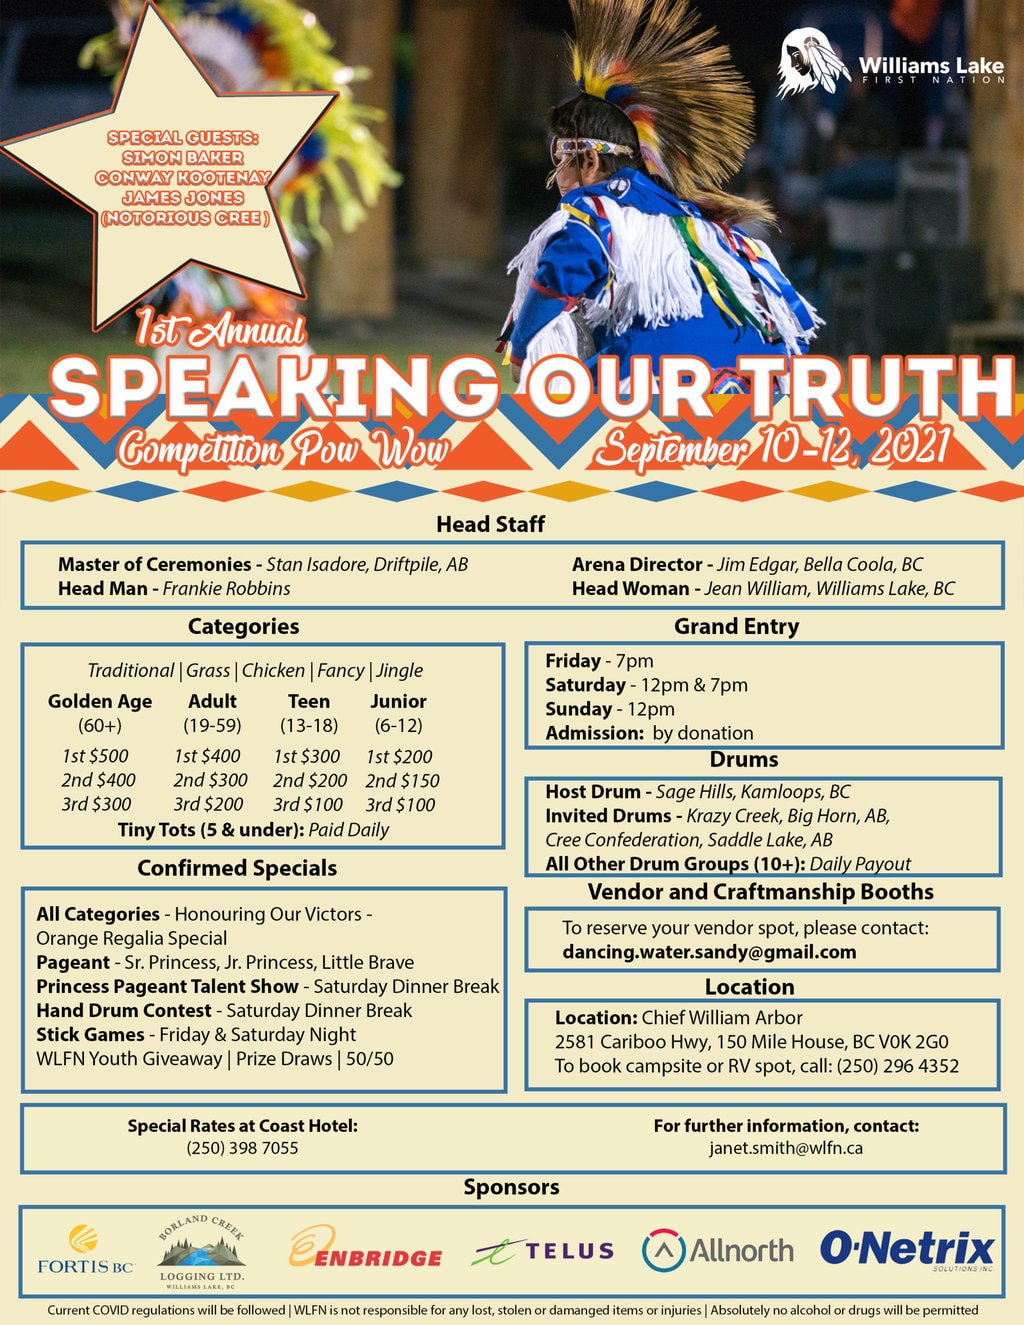 1st Annual Speaking Our Truth Competition Pow Wow 2021